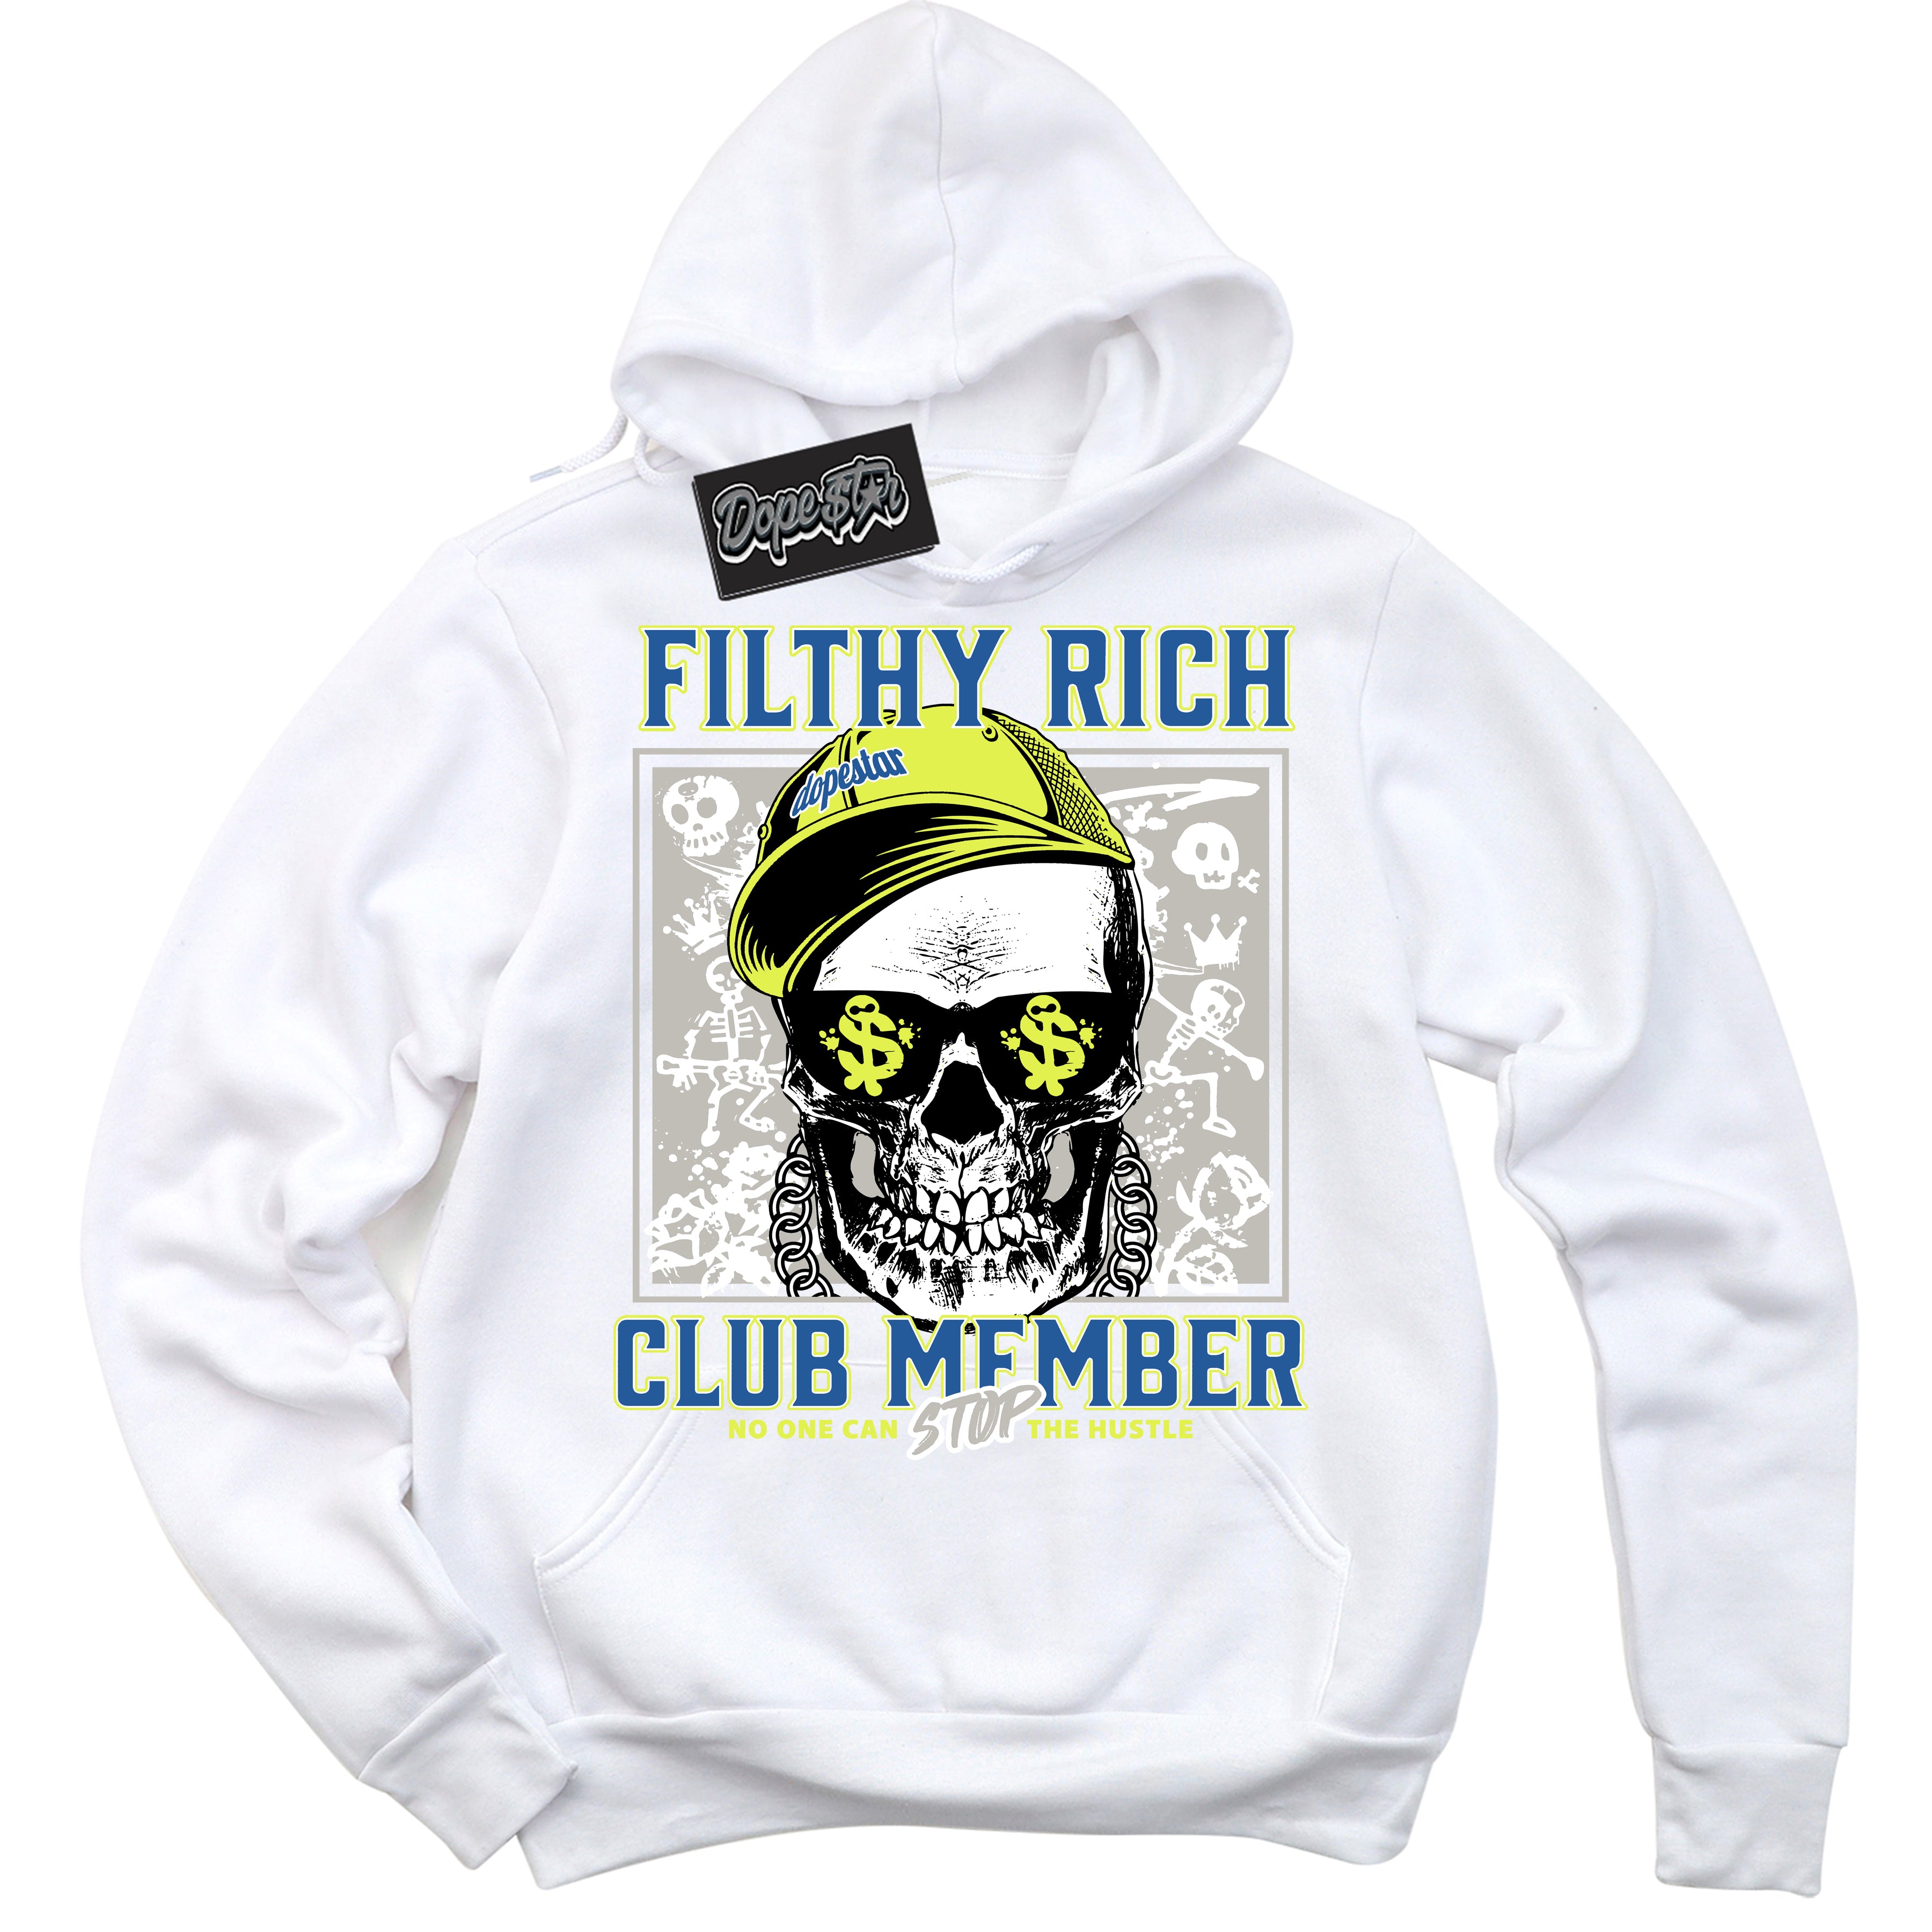 Cool White Hoodie with “ Filthy Rich ”  design that Perfectly Matches '86 Air Max Day 1s Sneakers.